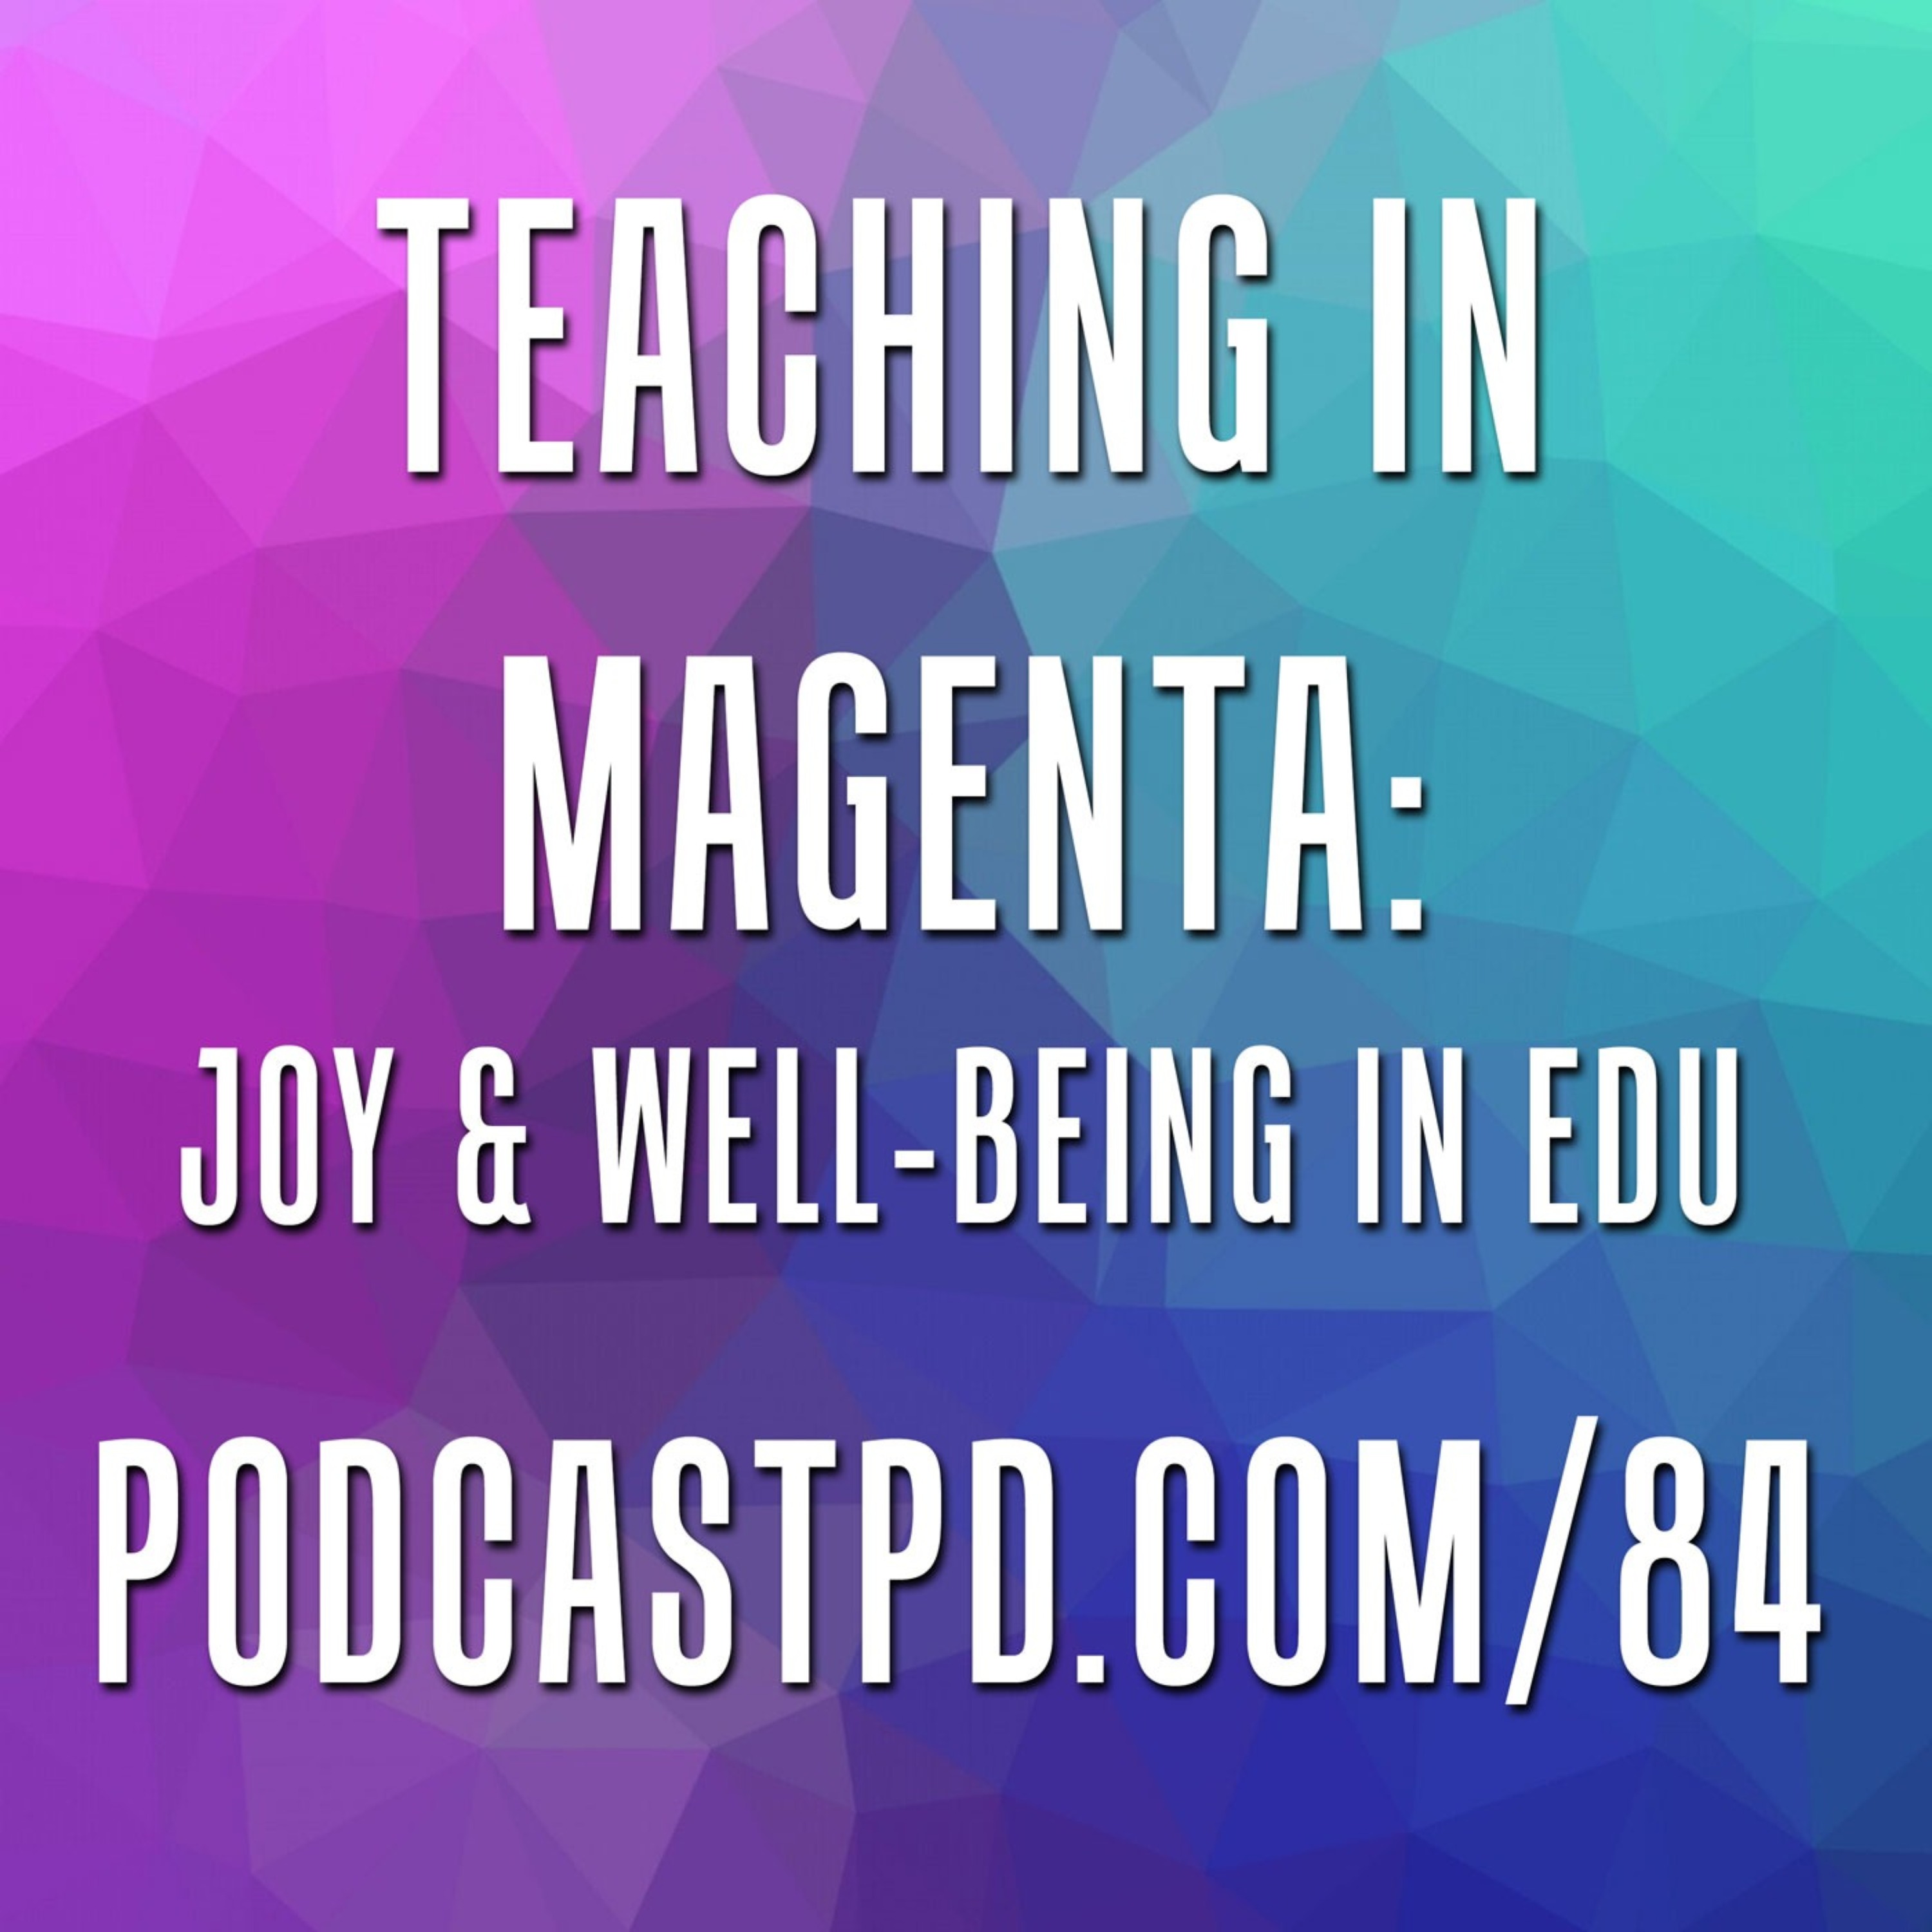 Teaching in Magenta: Joy & Well-Bring in Education - PPD084 Image